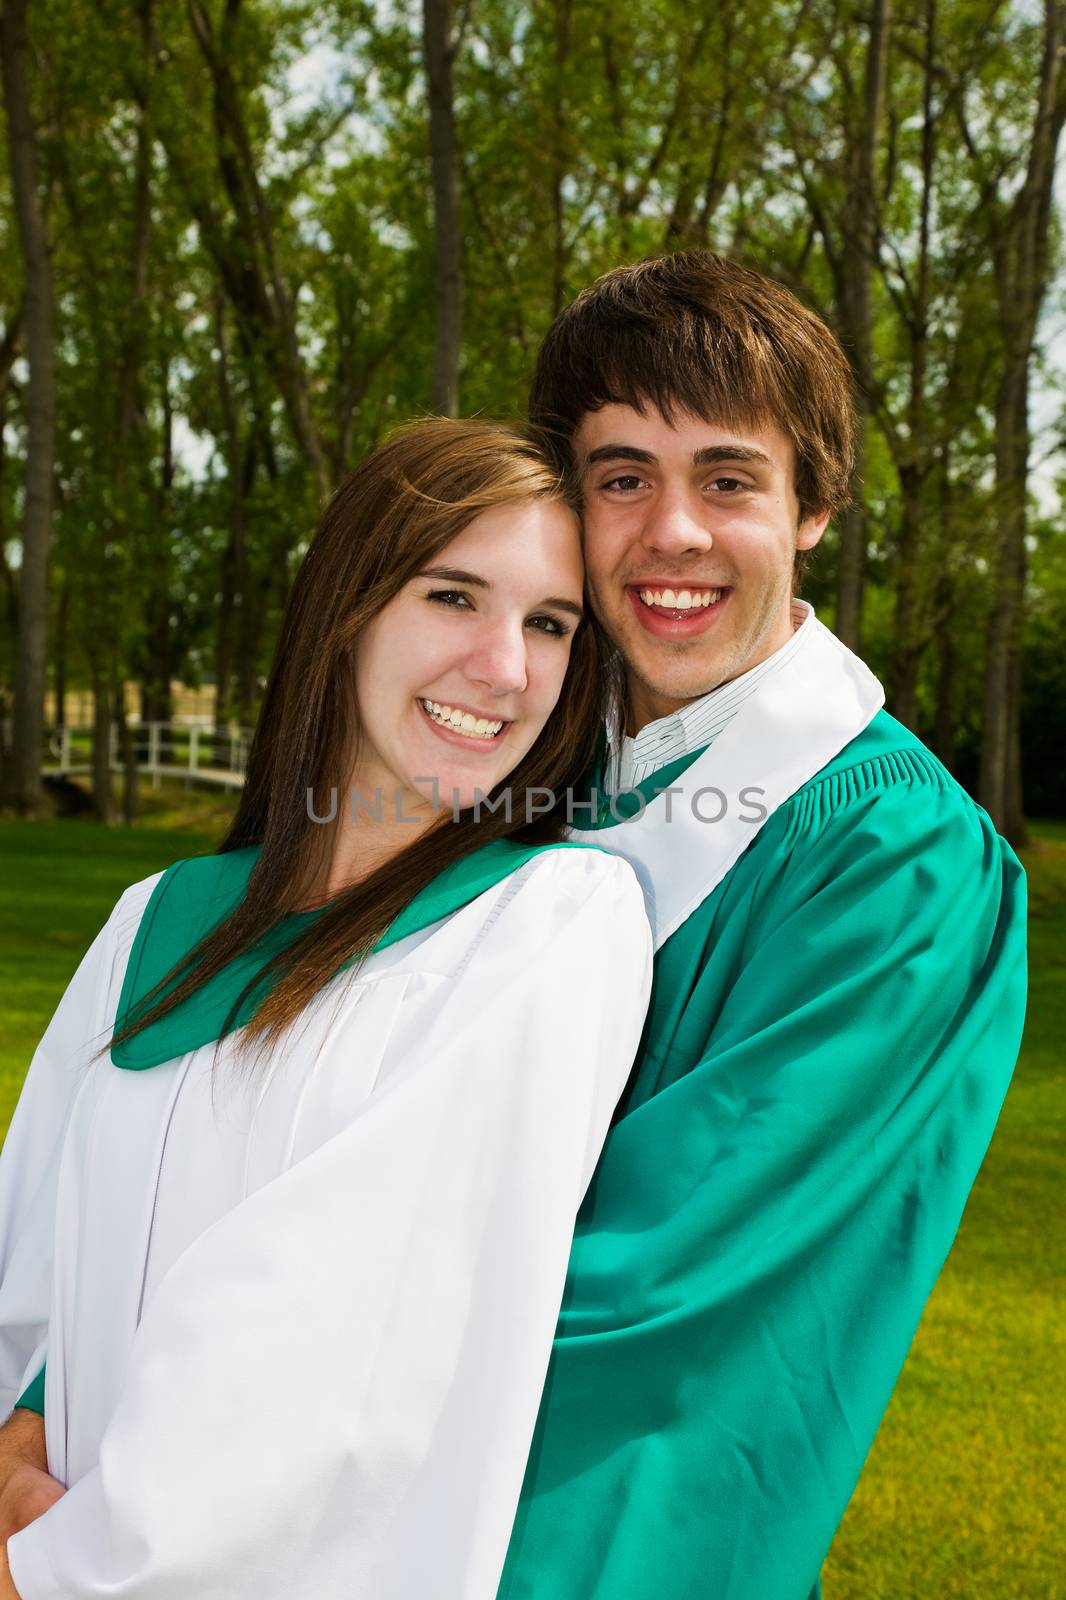 A young couple celebrating their graduation together.